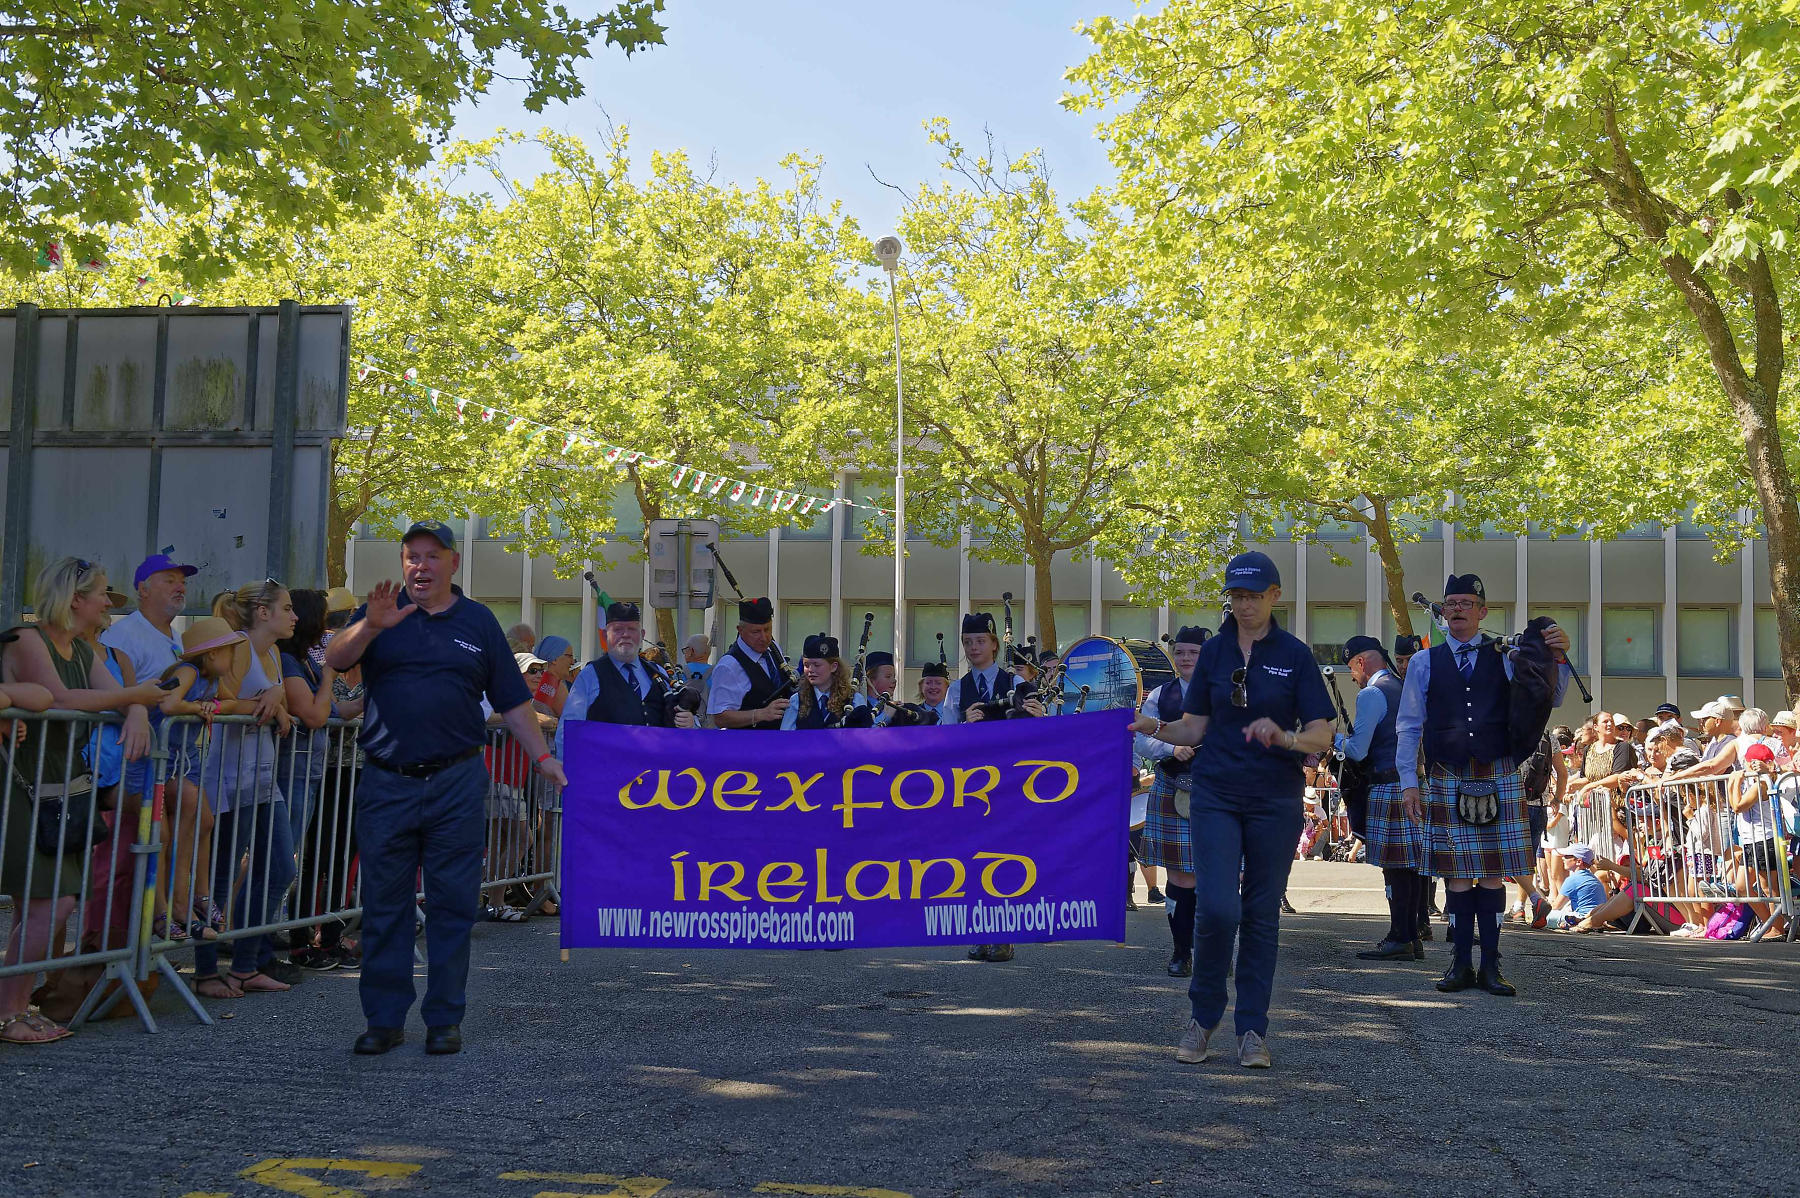 interceltique-2018-image13183-new-ross-and-district-pipe-band-d-irlande